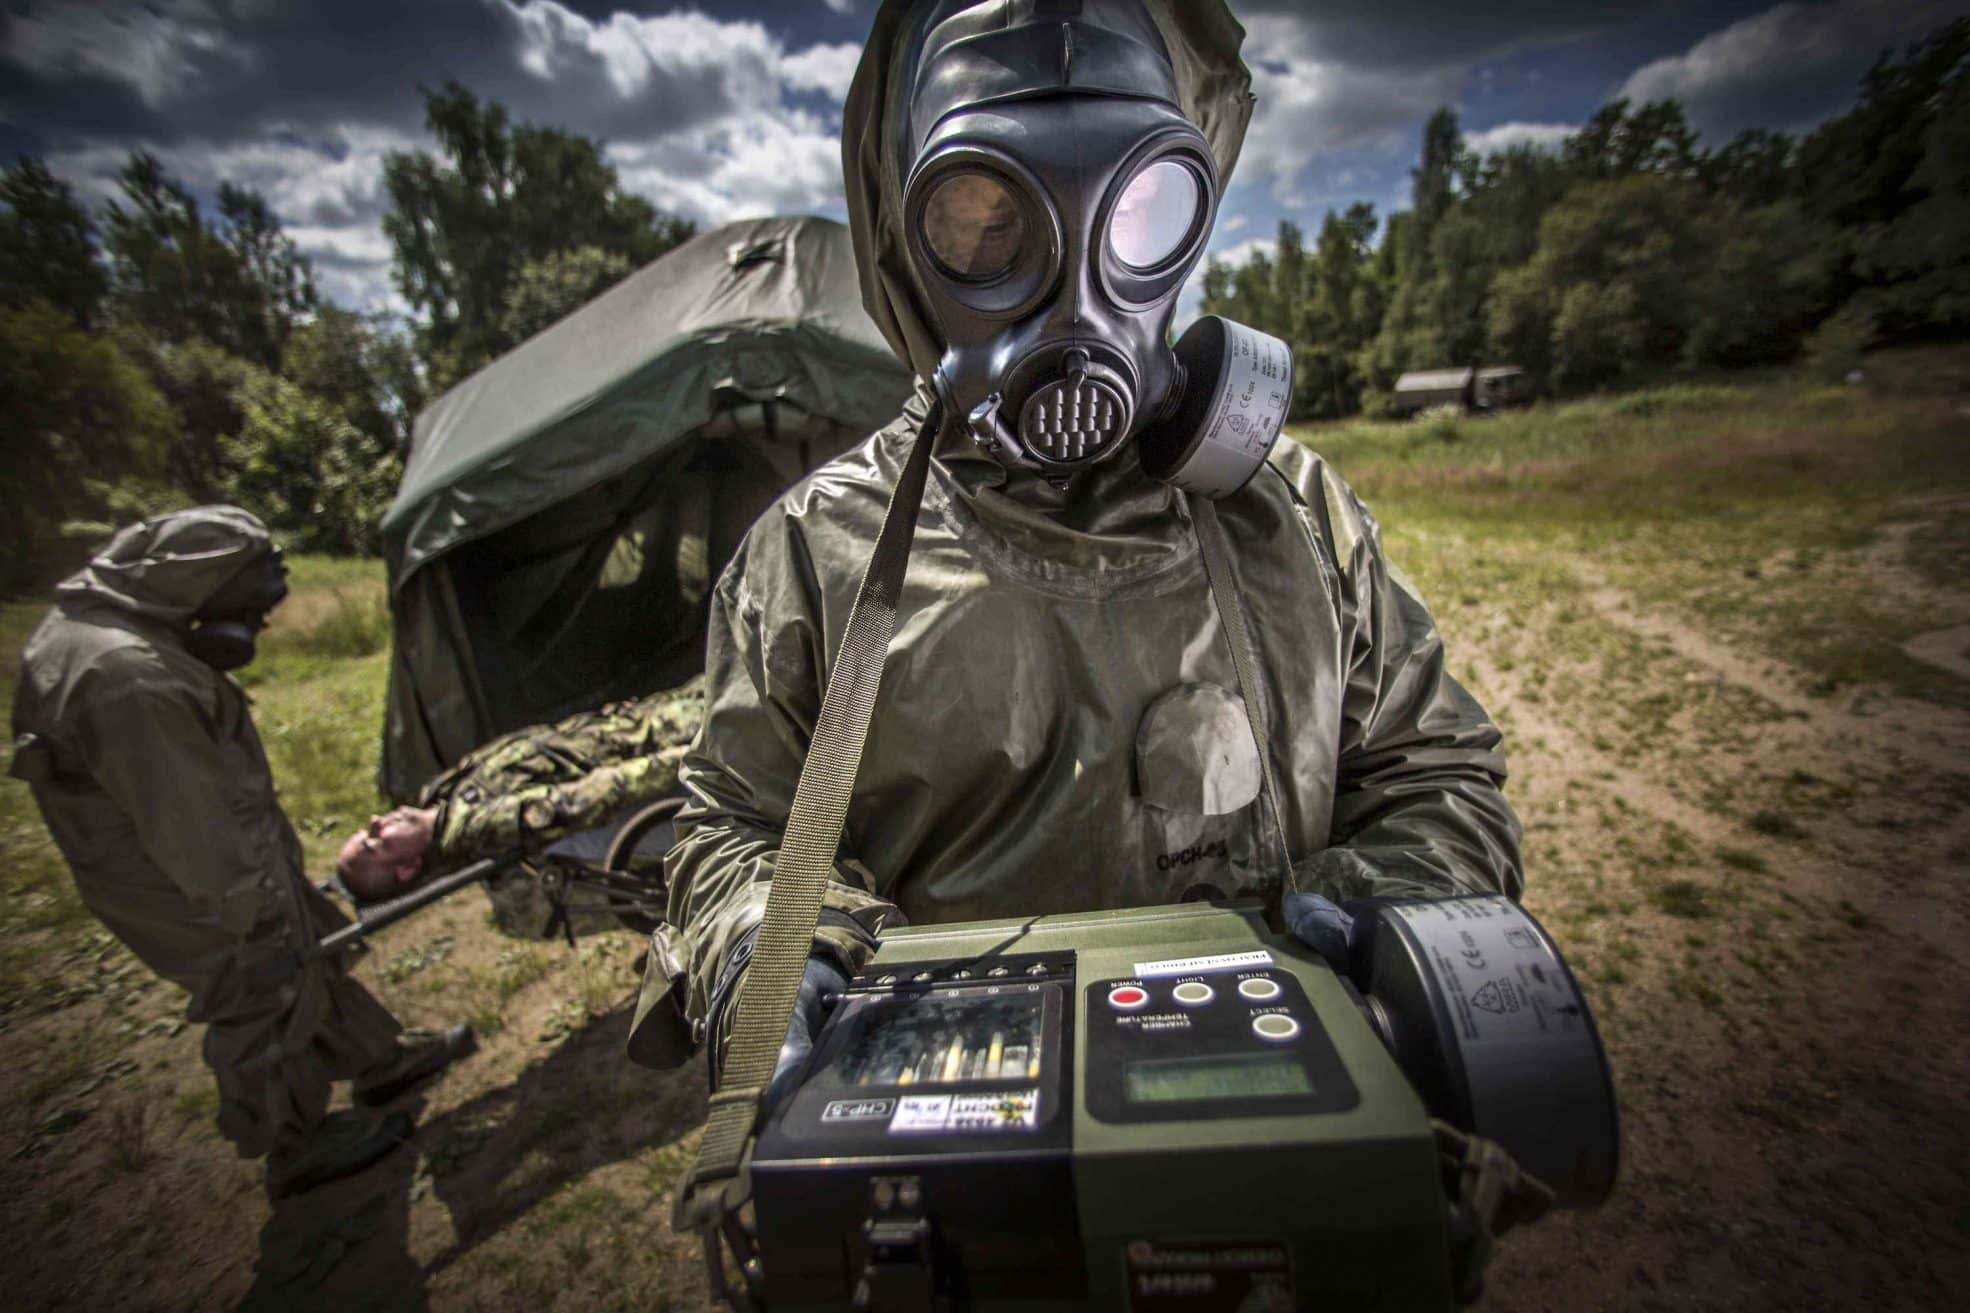 Military Gas Mask - Protects Against CBRN Agents, Industrial Toxic Gases an...